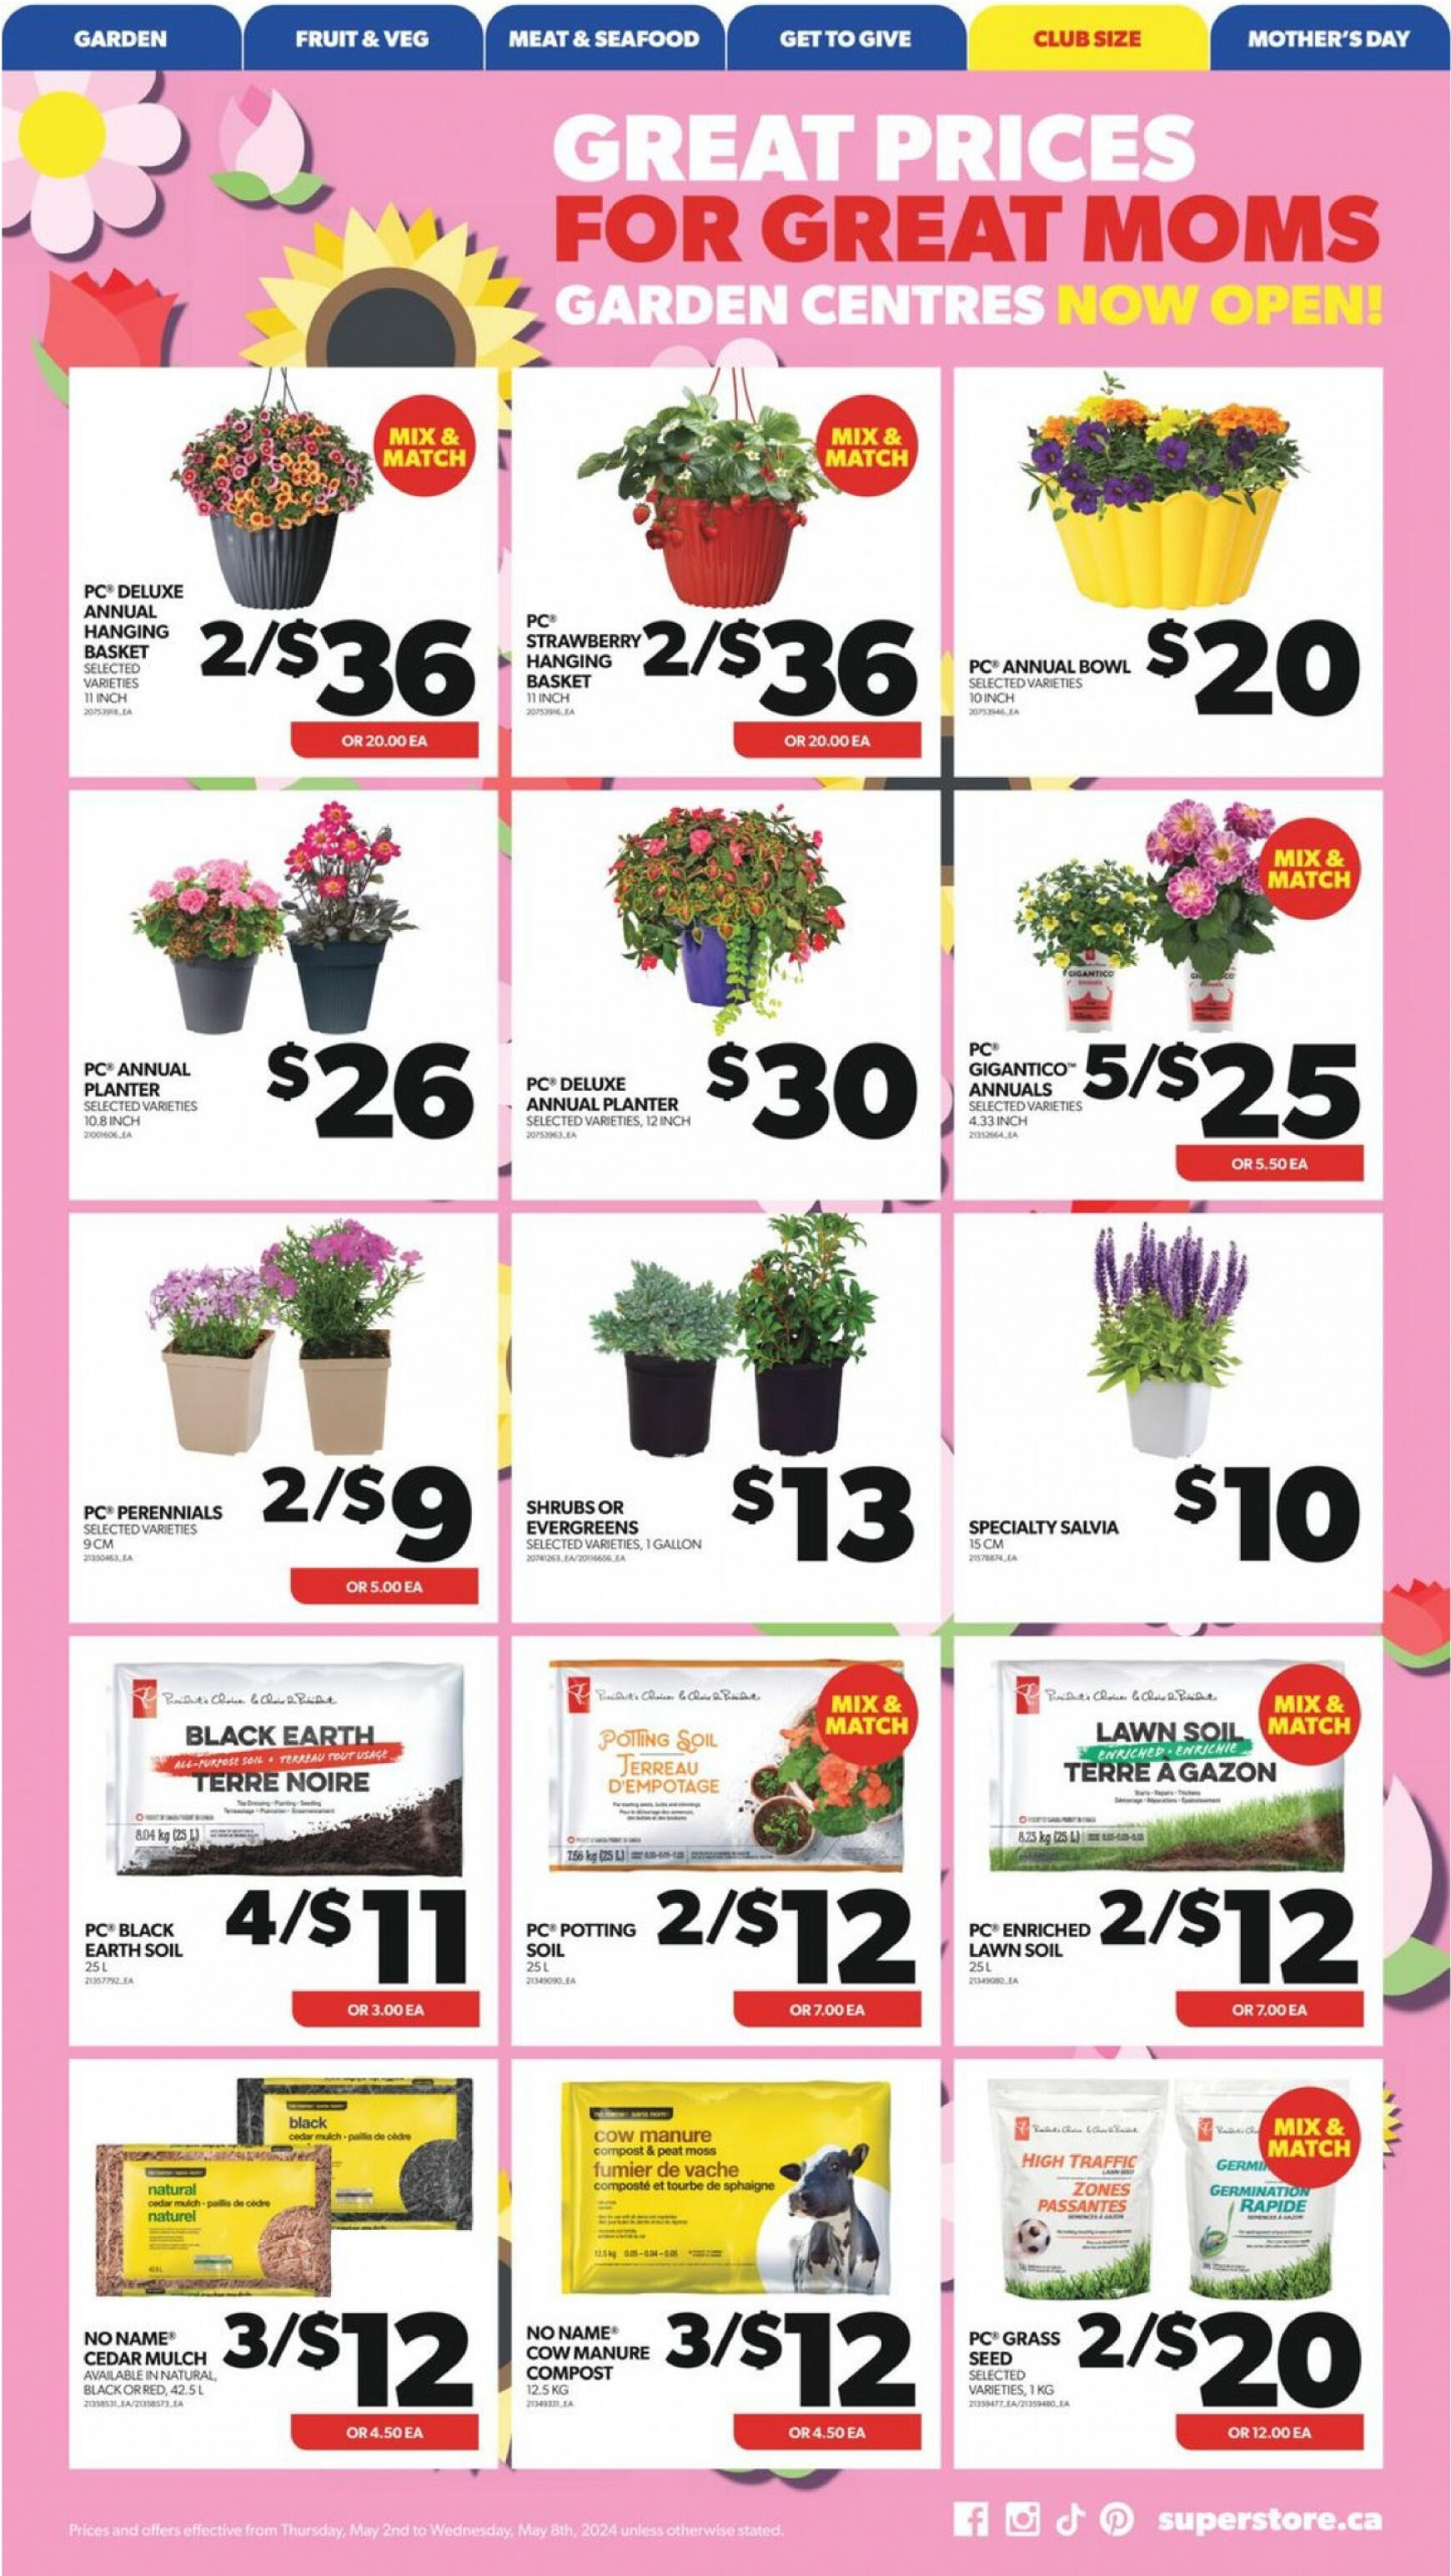 real-canadian-superstore - Real Canadian Superstore flyer current 02.05. - 08.05. - page: 7